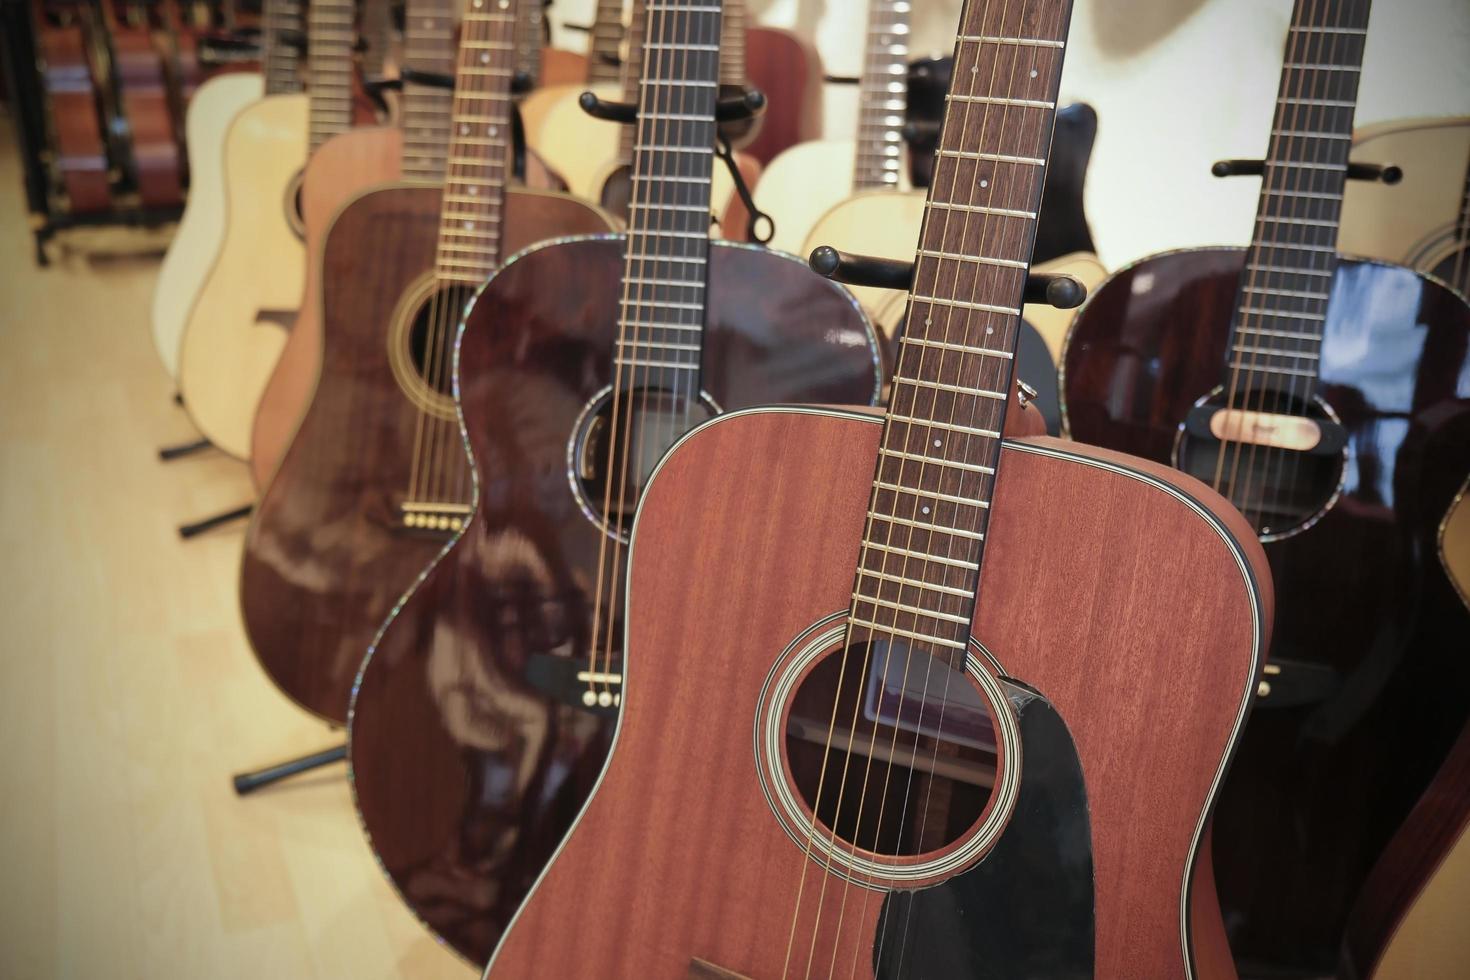 Many acoustic guitars are in a store photo